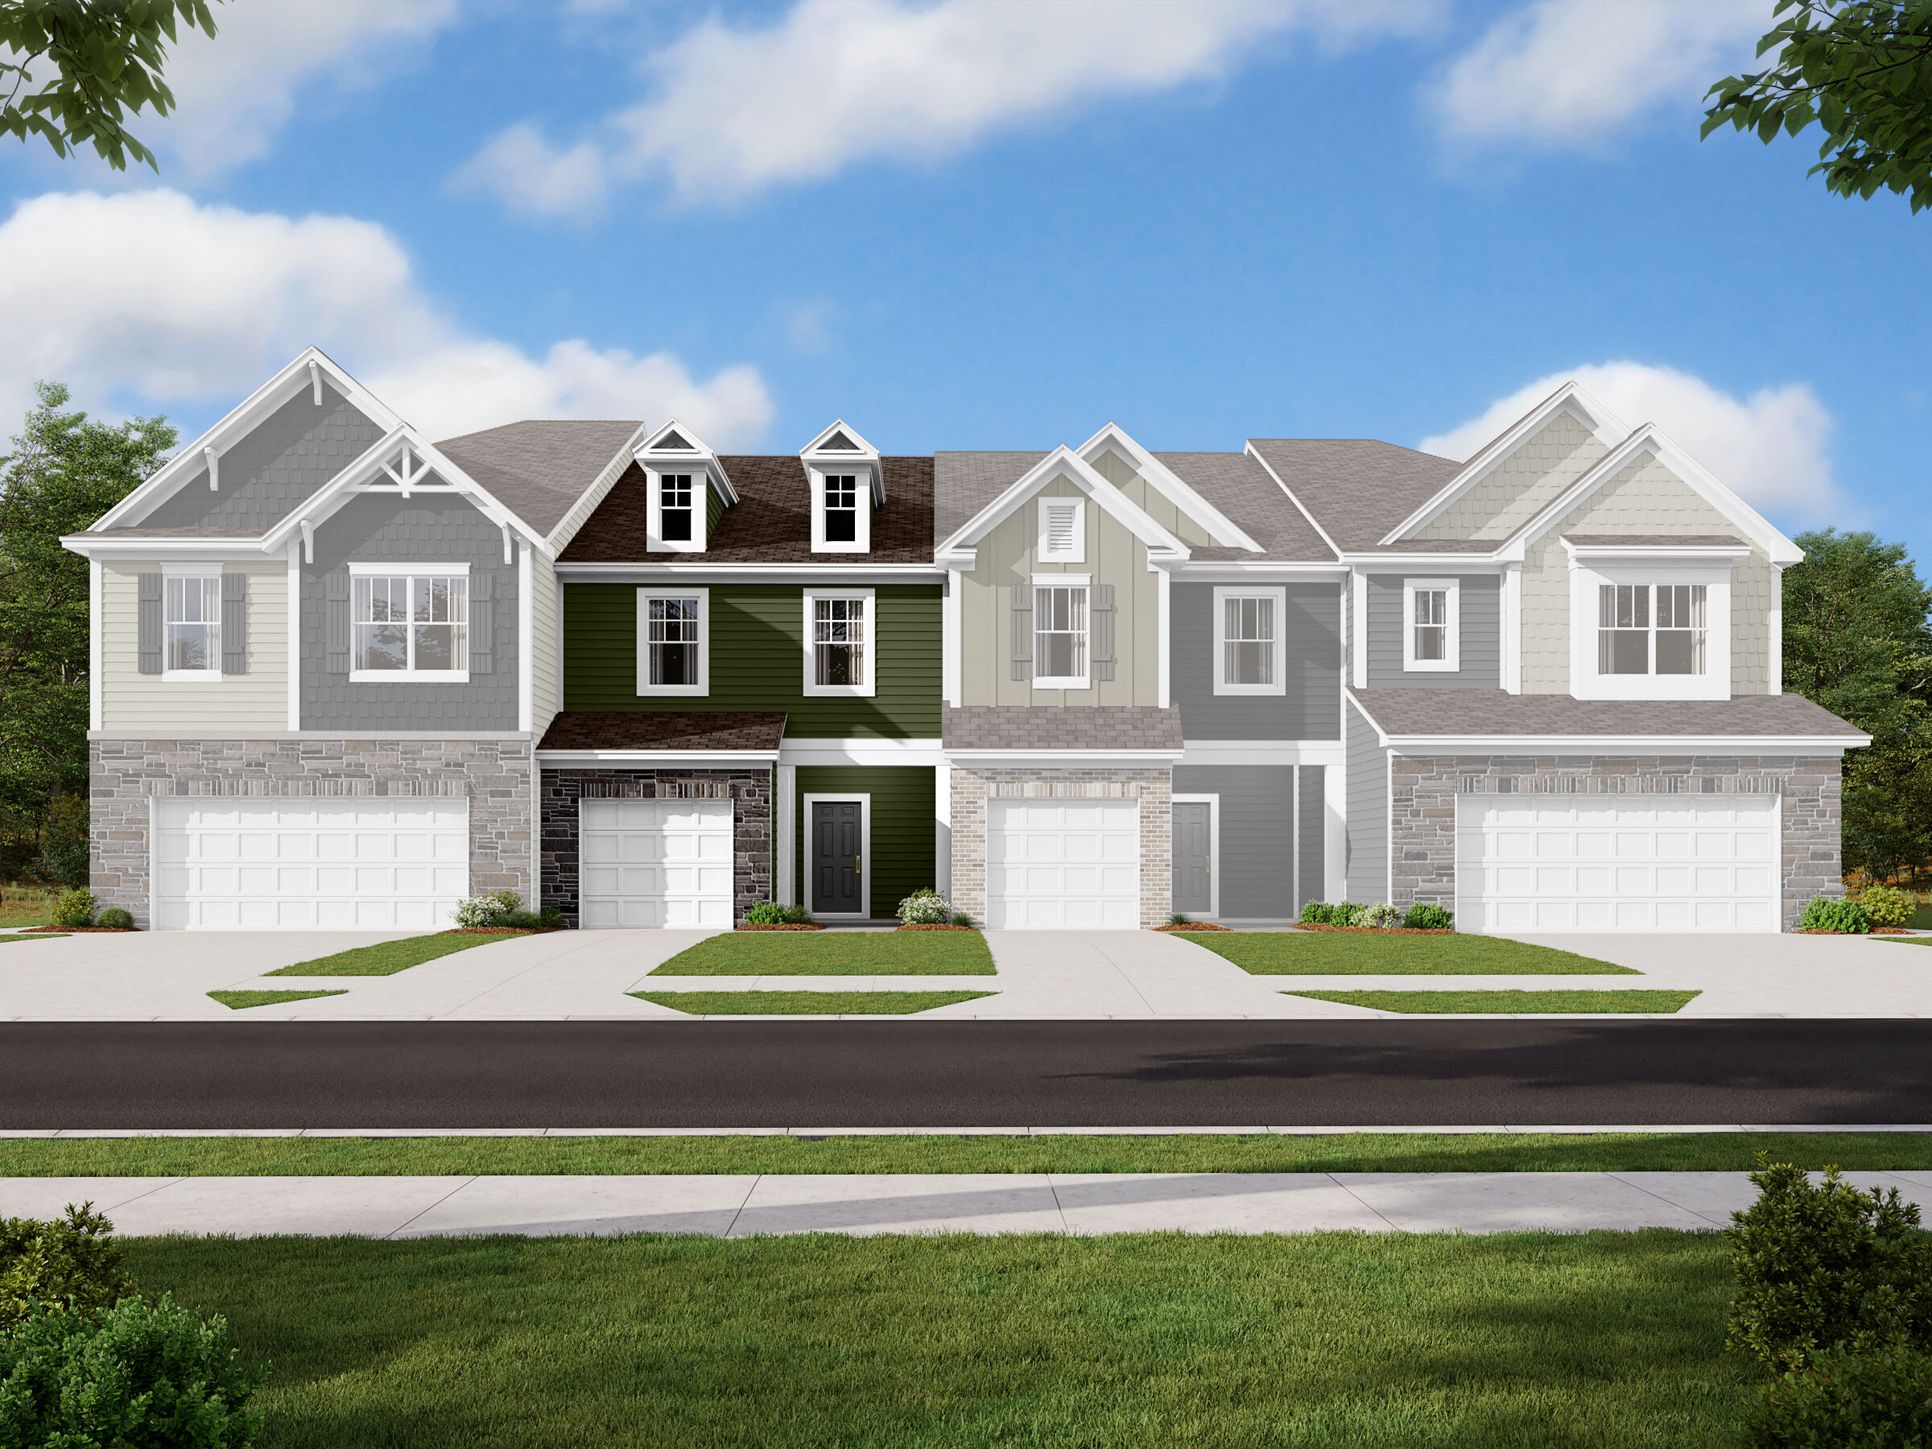 DEF Townhomes String - Wylie:DEF Townhomes String - Wylie